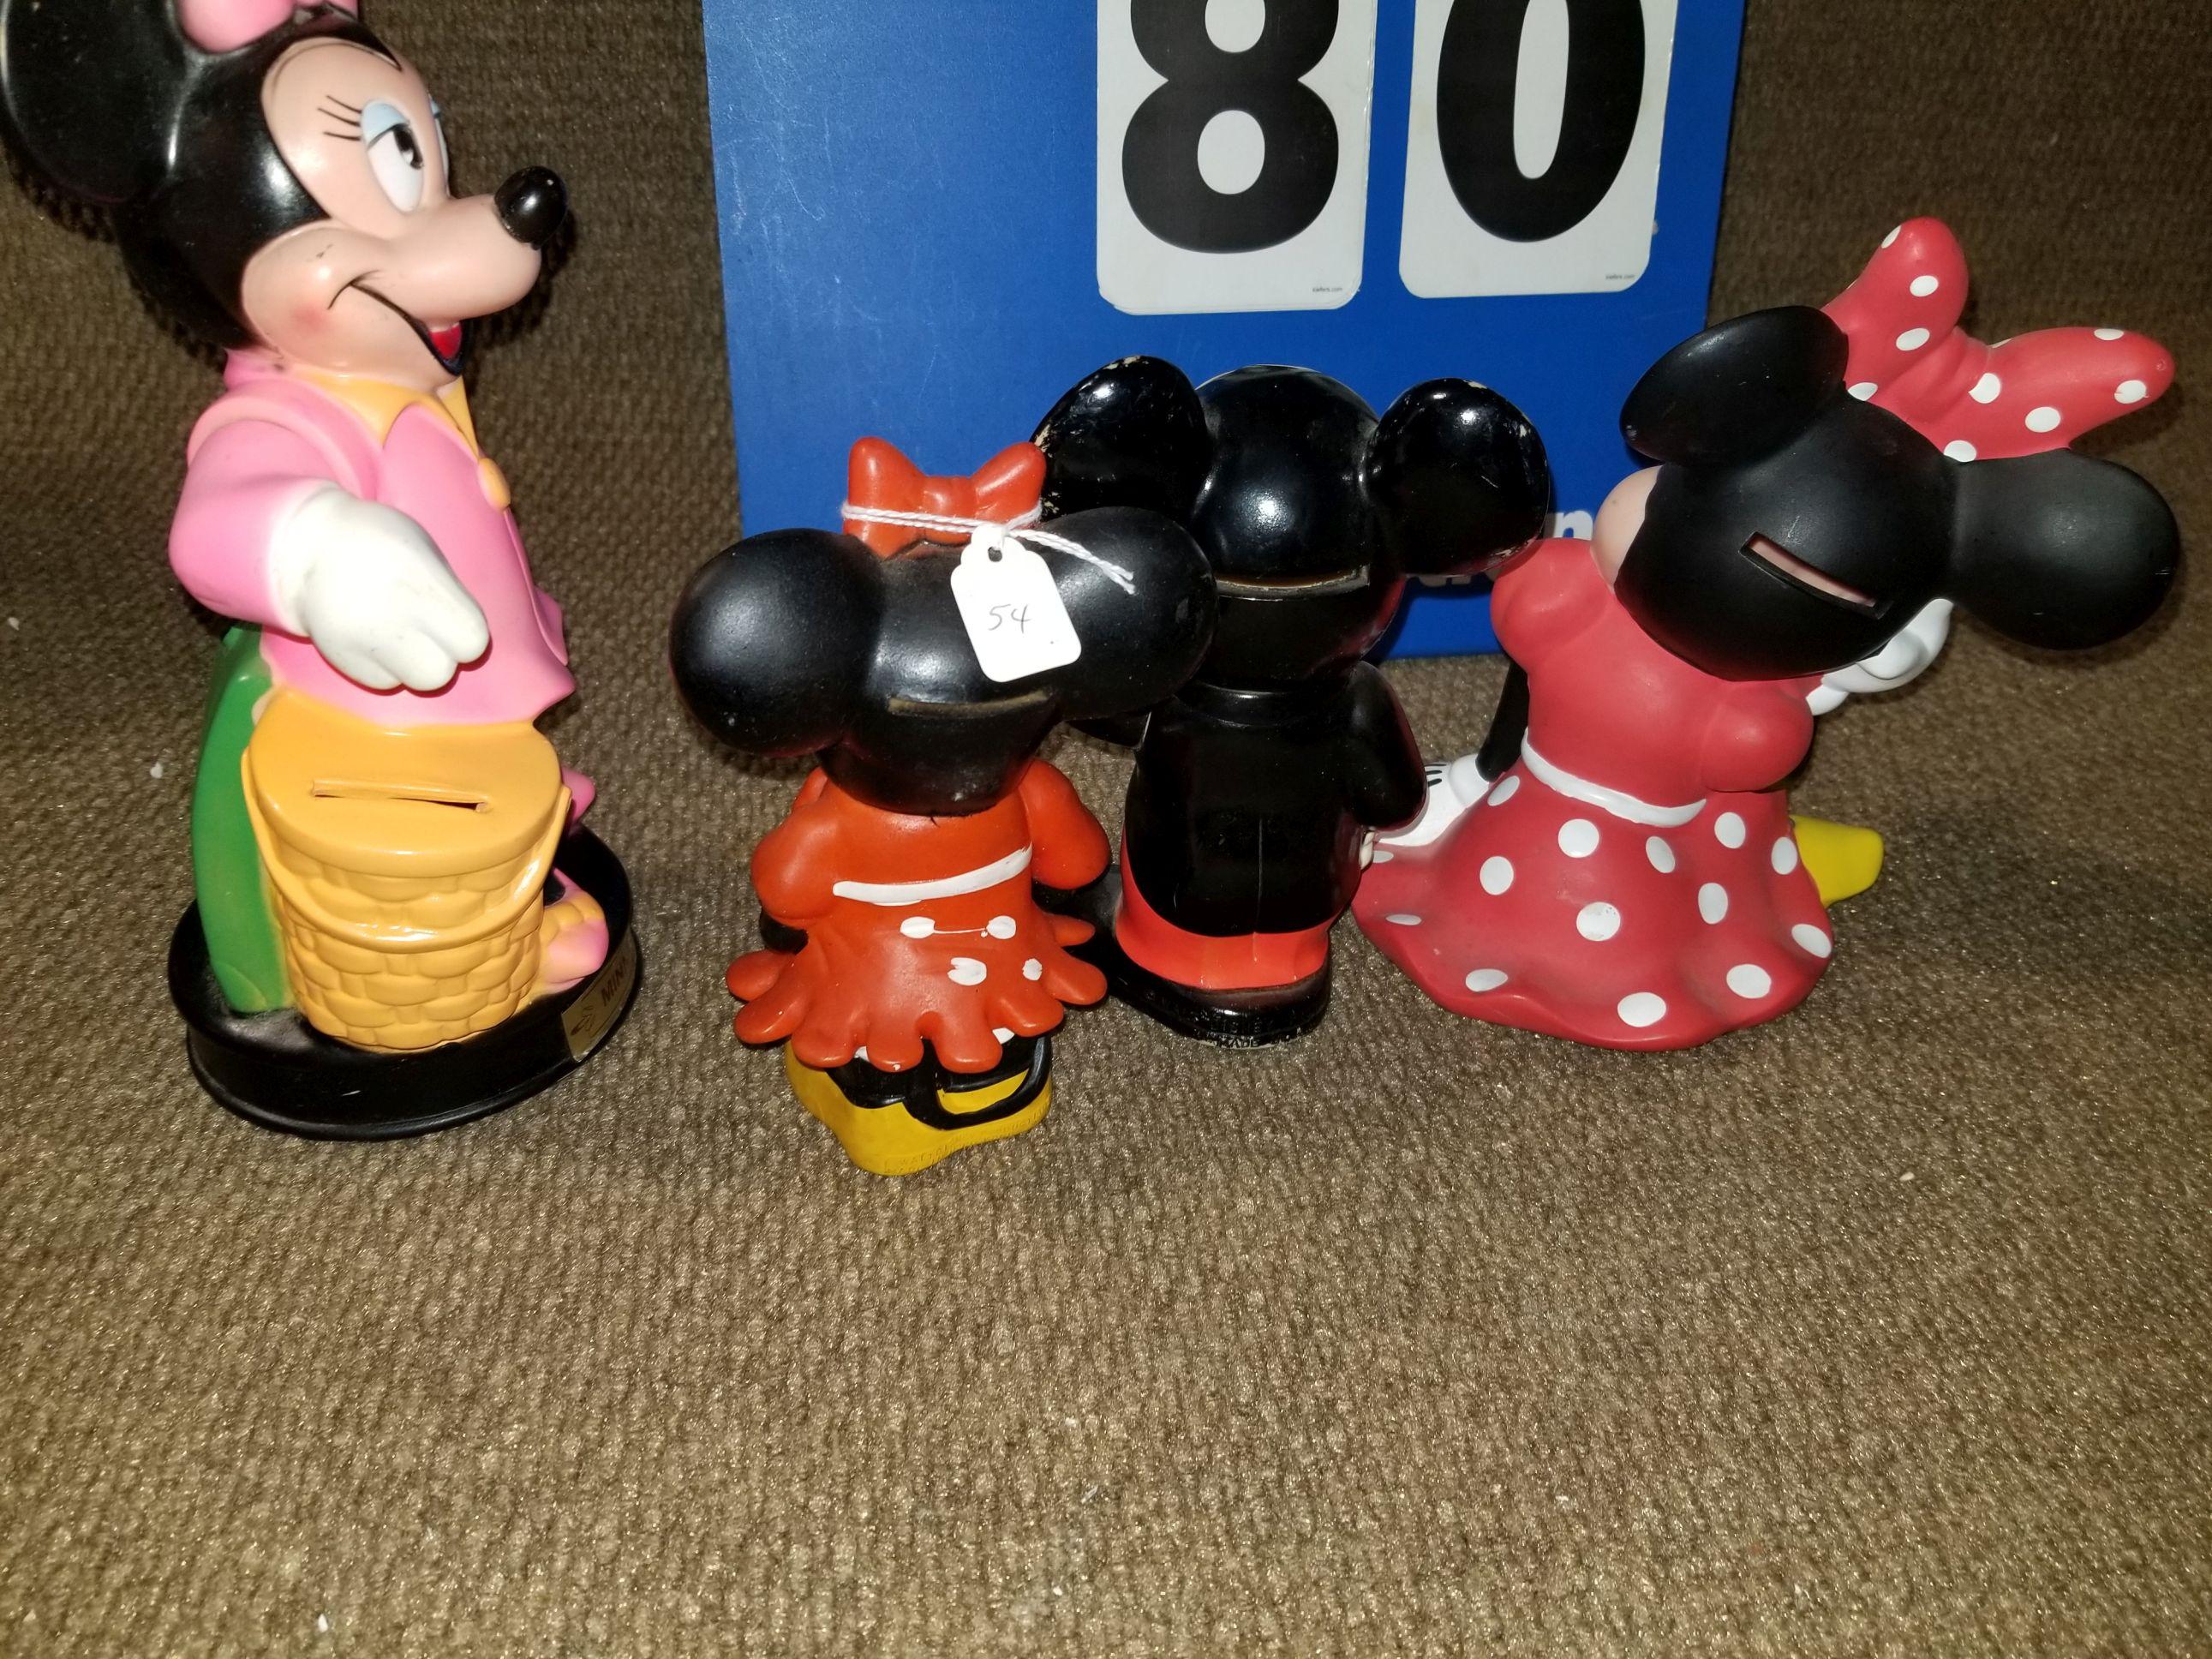 Five Mickey & Minnie Mouse coin banks